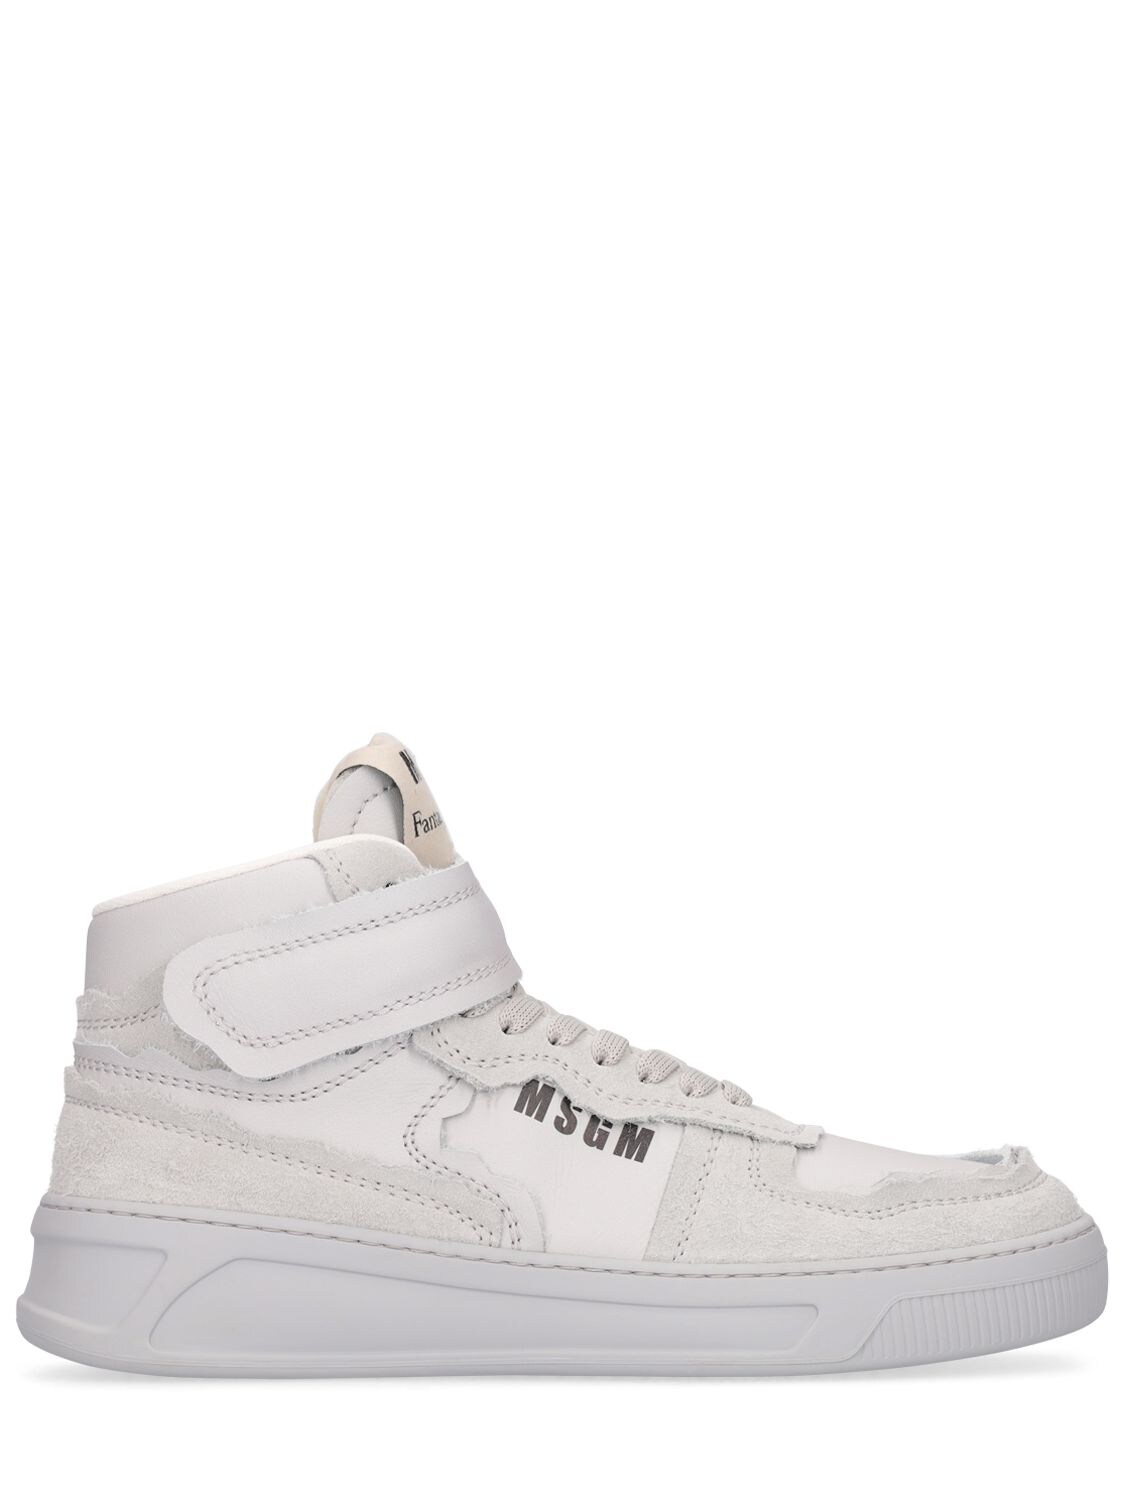 Msgm High Top Suede Sneakers In White